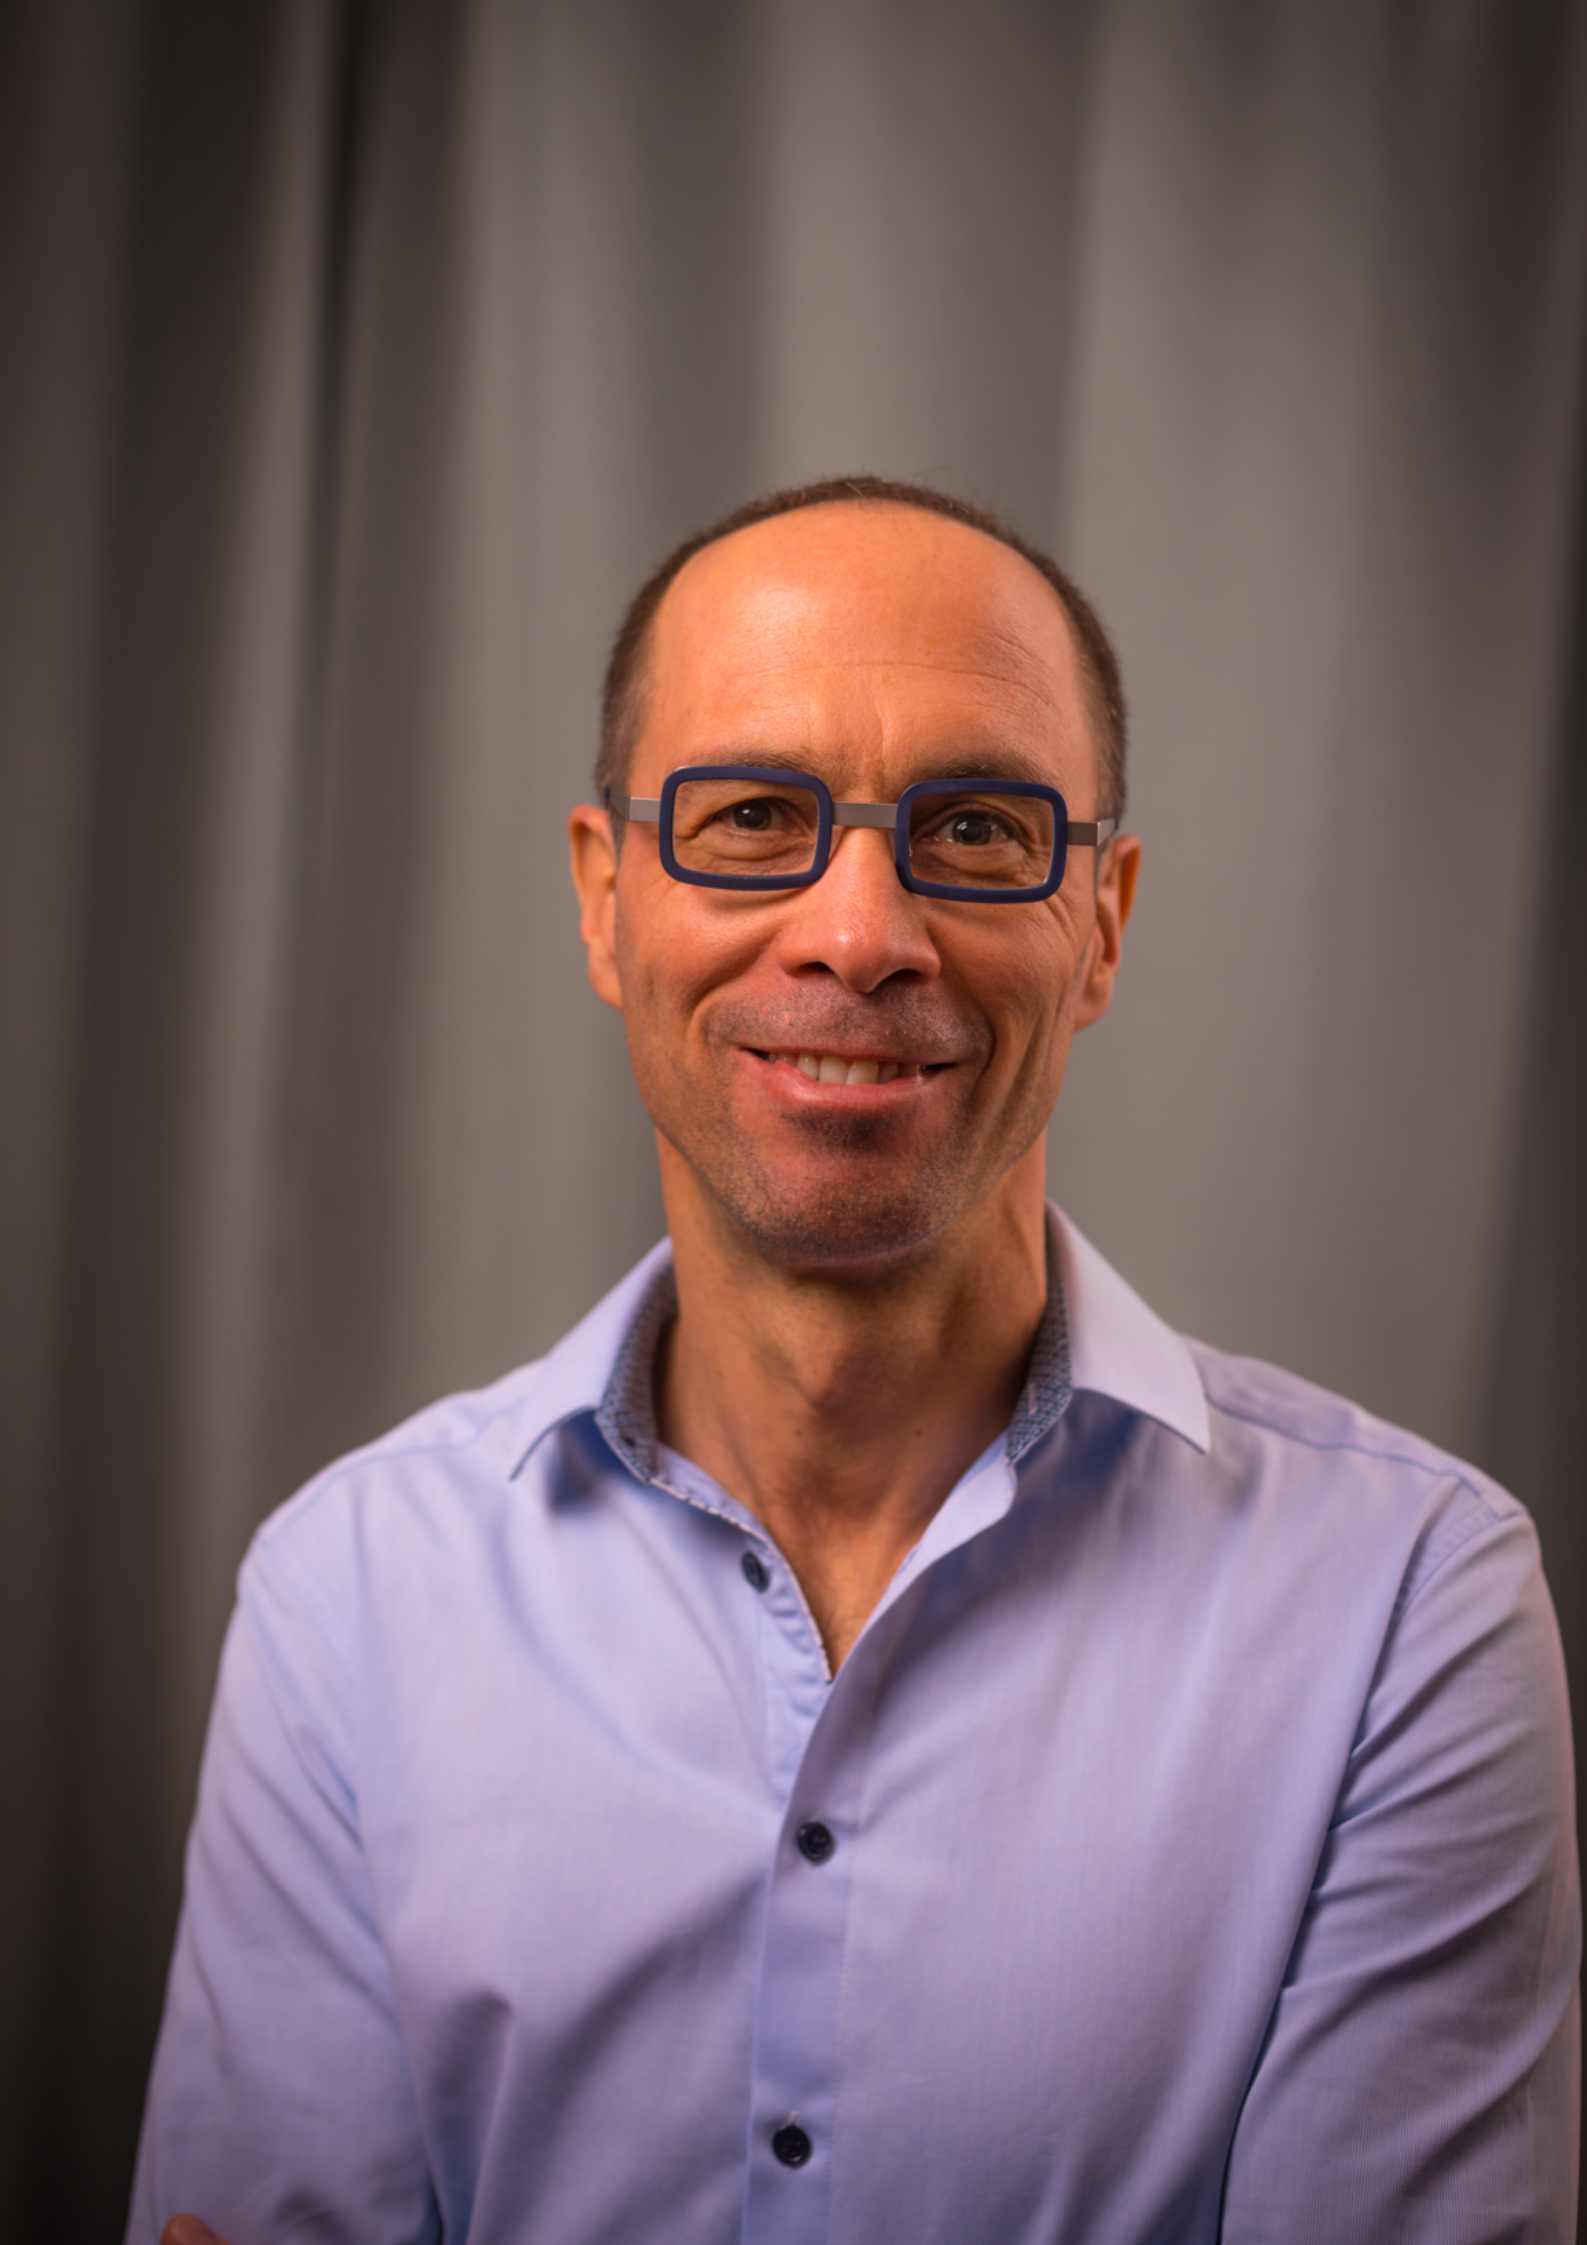 Dr Olivier Rozant, aerospace honeycomb expert, has been appointed CTO of EconCore.